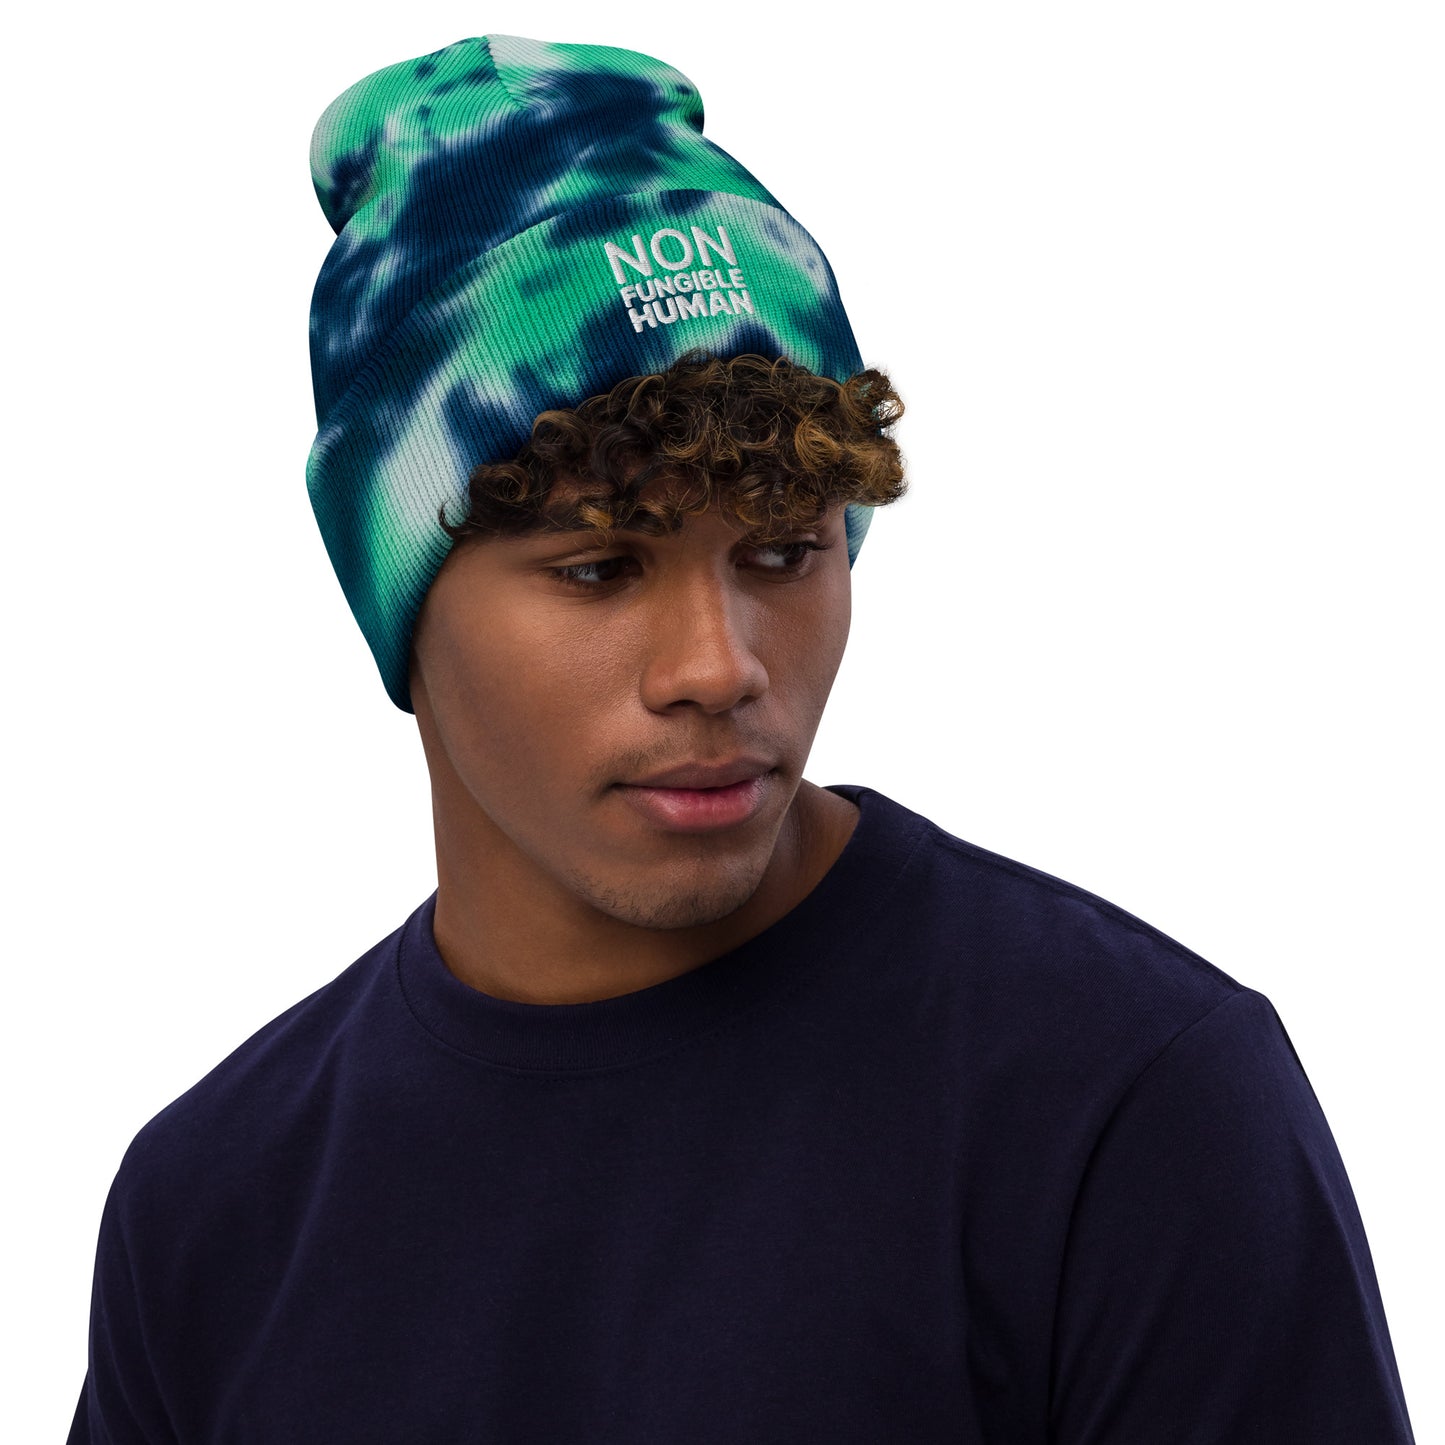 NON FUNGIBLE HUMAN EMBROIDERY Tie-dye beanie